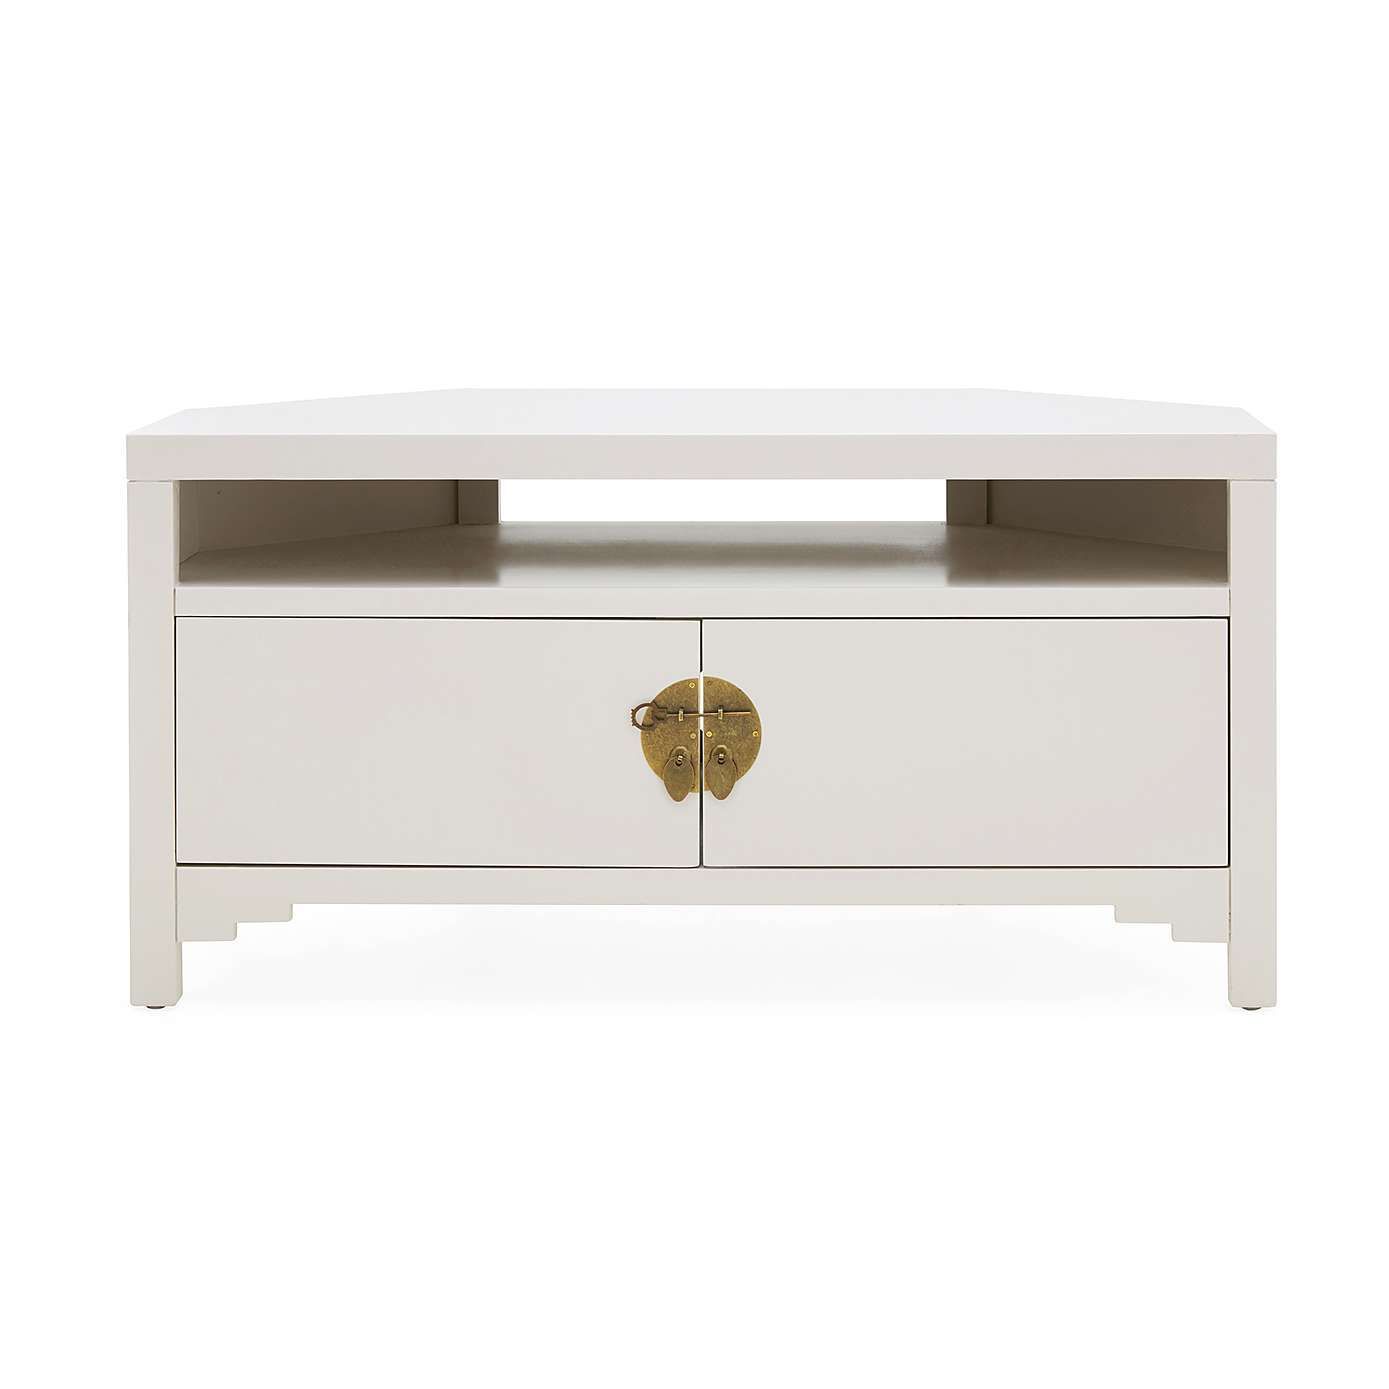 Hanna Oyster Corner Tv Stand | Dunelm (with Images Inside Hanna Oyster Corner Tv Stands (View 2 of 9)